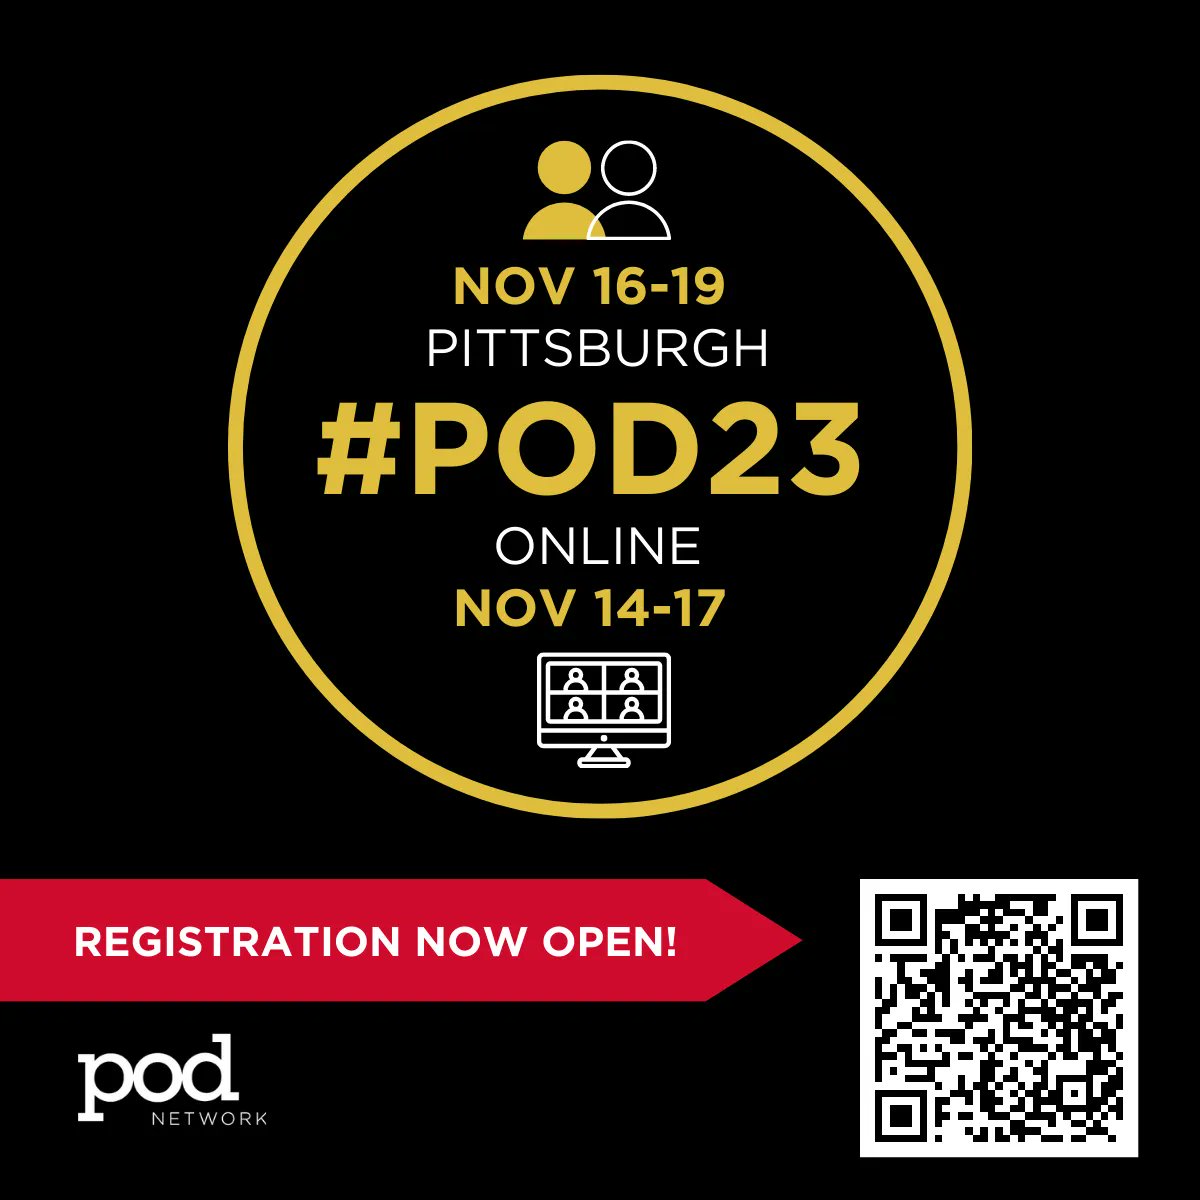 🚀 Ignite change, inspire success! Join the POD Network community for the 48th Annual Conference ! Envision the future of educational development alongside your colleagues. Registration is now open. Register today: buff.ly/3TSNTpd #POD23 #highered #innnovationinhighered